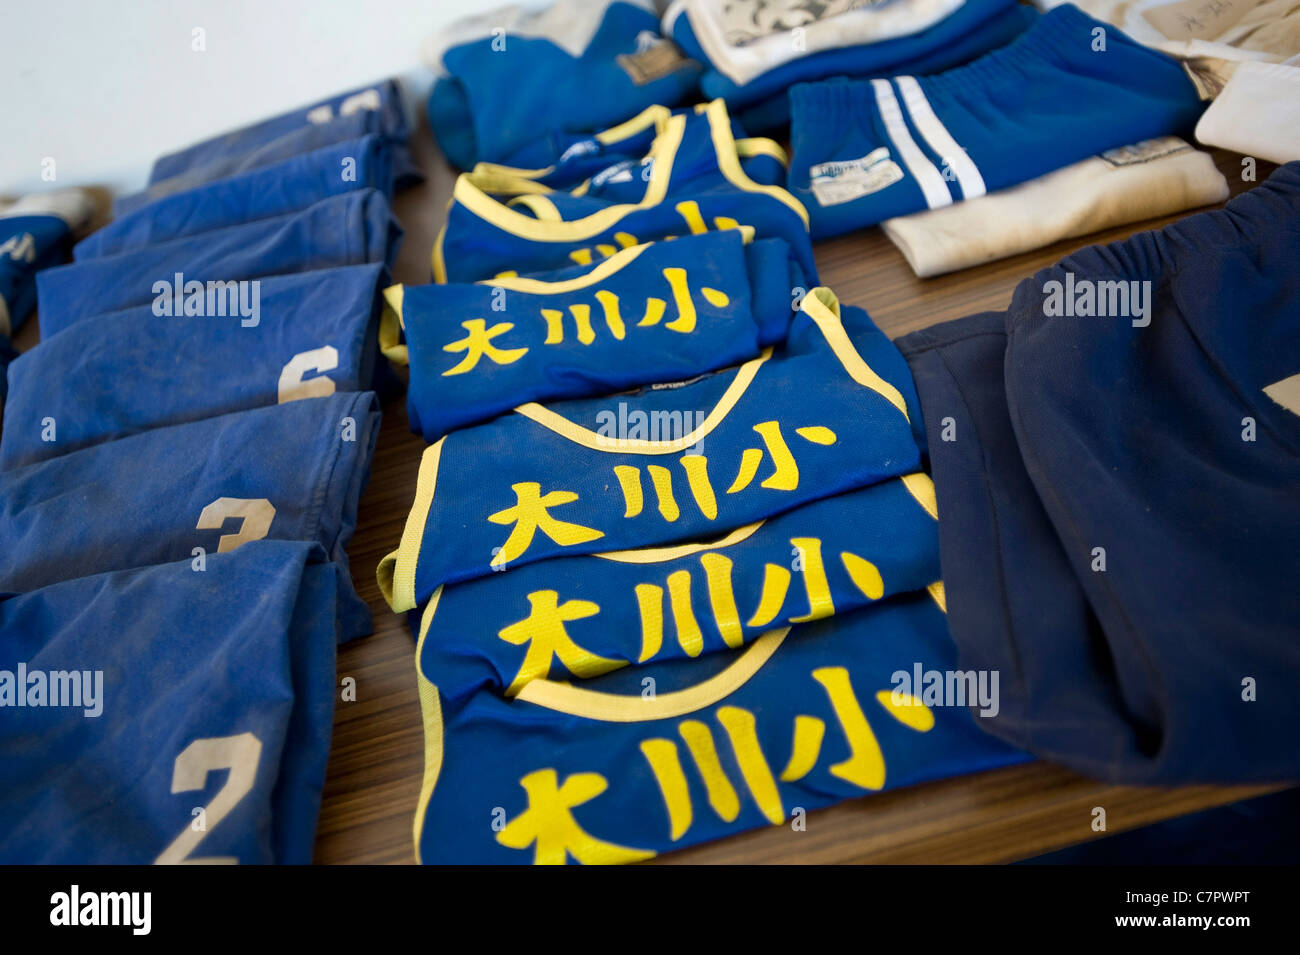 Vests and other gym clothes belonging to elementary school children from Okawa elementary school, are laid out in a repository Stock Photo